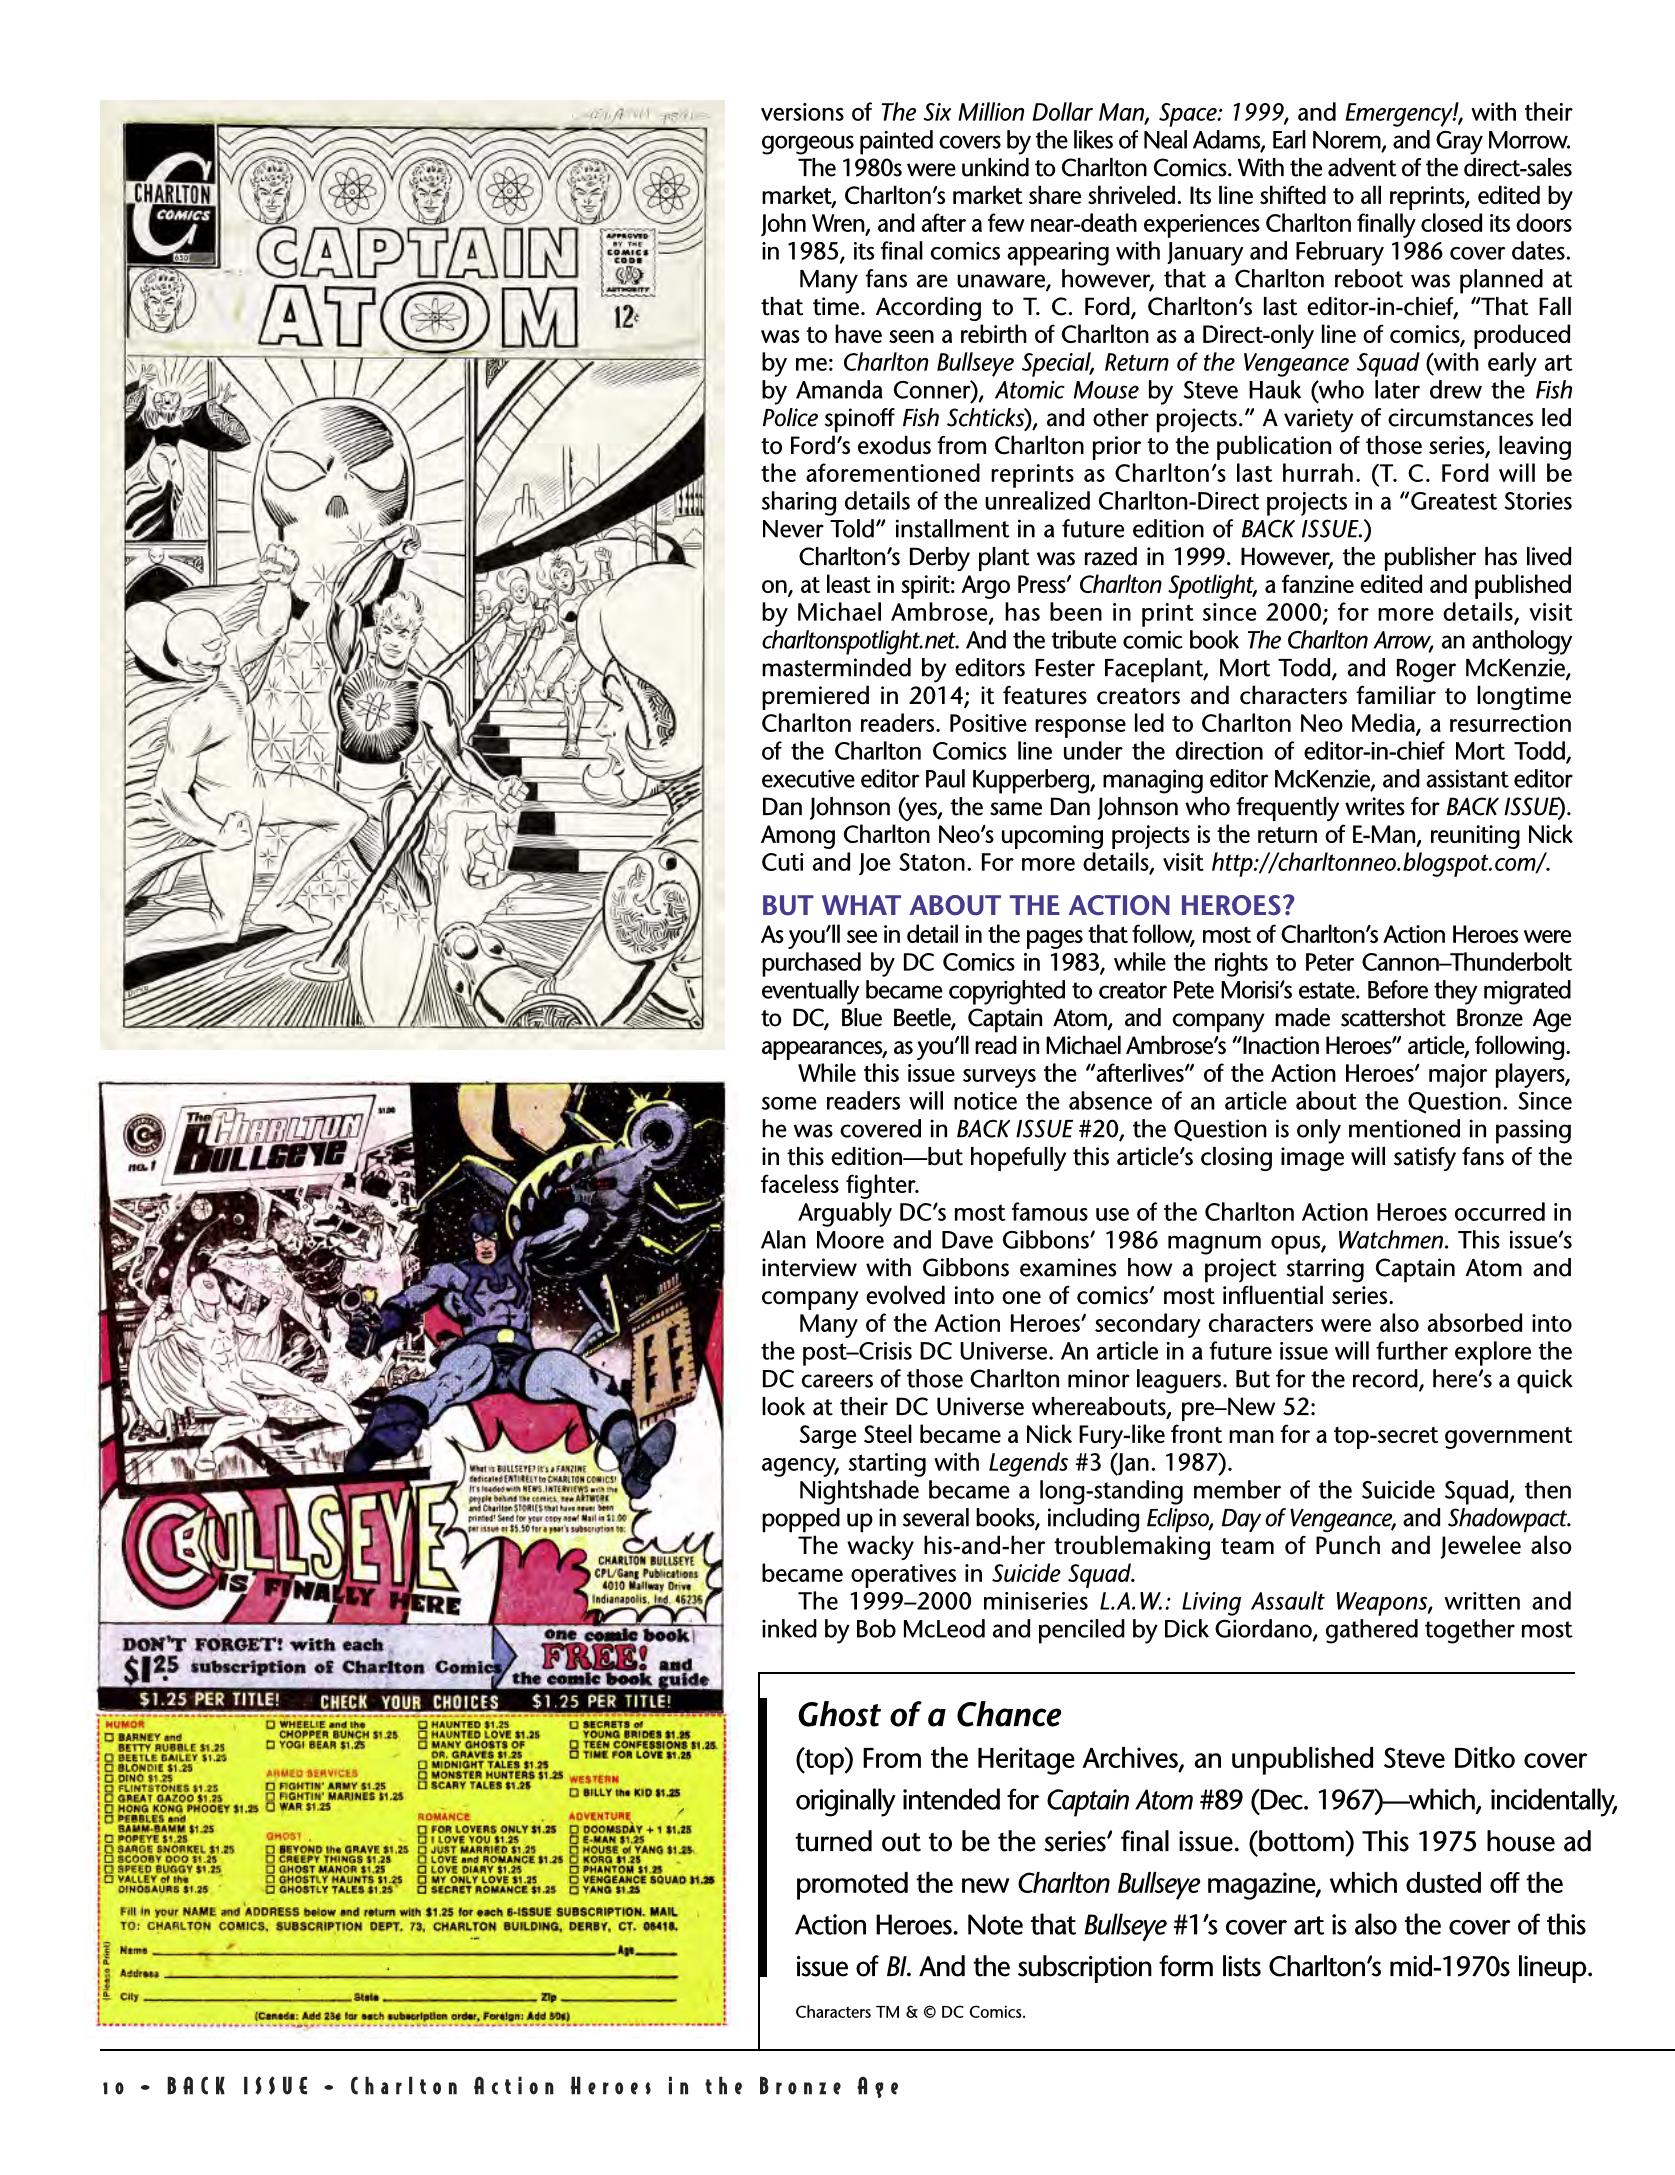 Read online Back Issue comic -  Issue #79 - 12